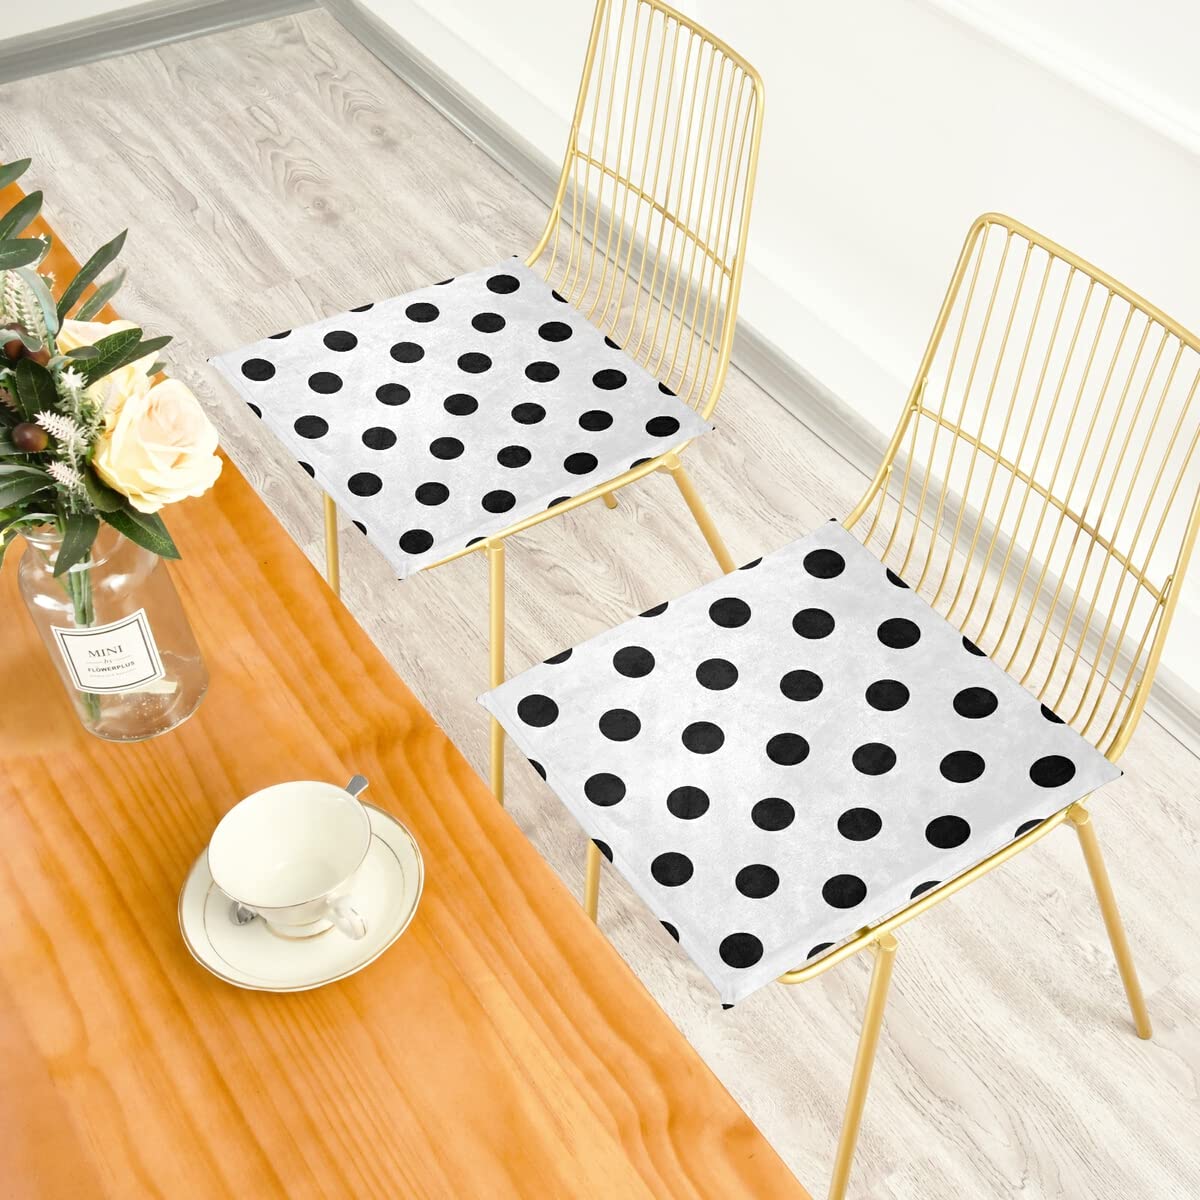 ALAZA White Black Polka Dot Chair Seat Cushion Memory Foam Pads for Home Kitchen Dining Office Chairs Car Seats 15.7" x 15.7" x 1.2"